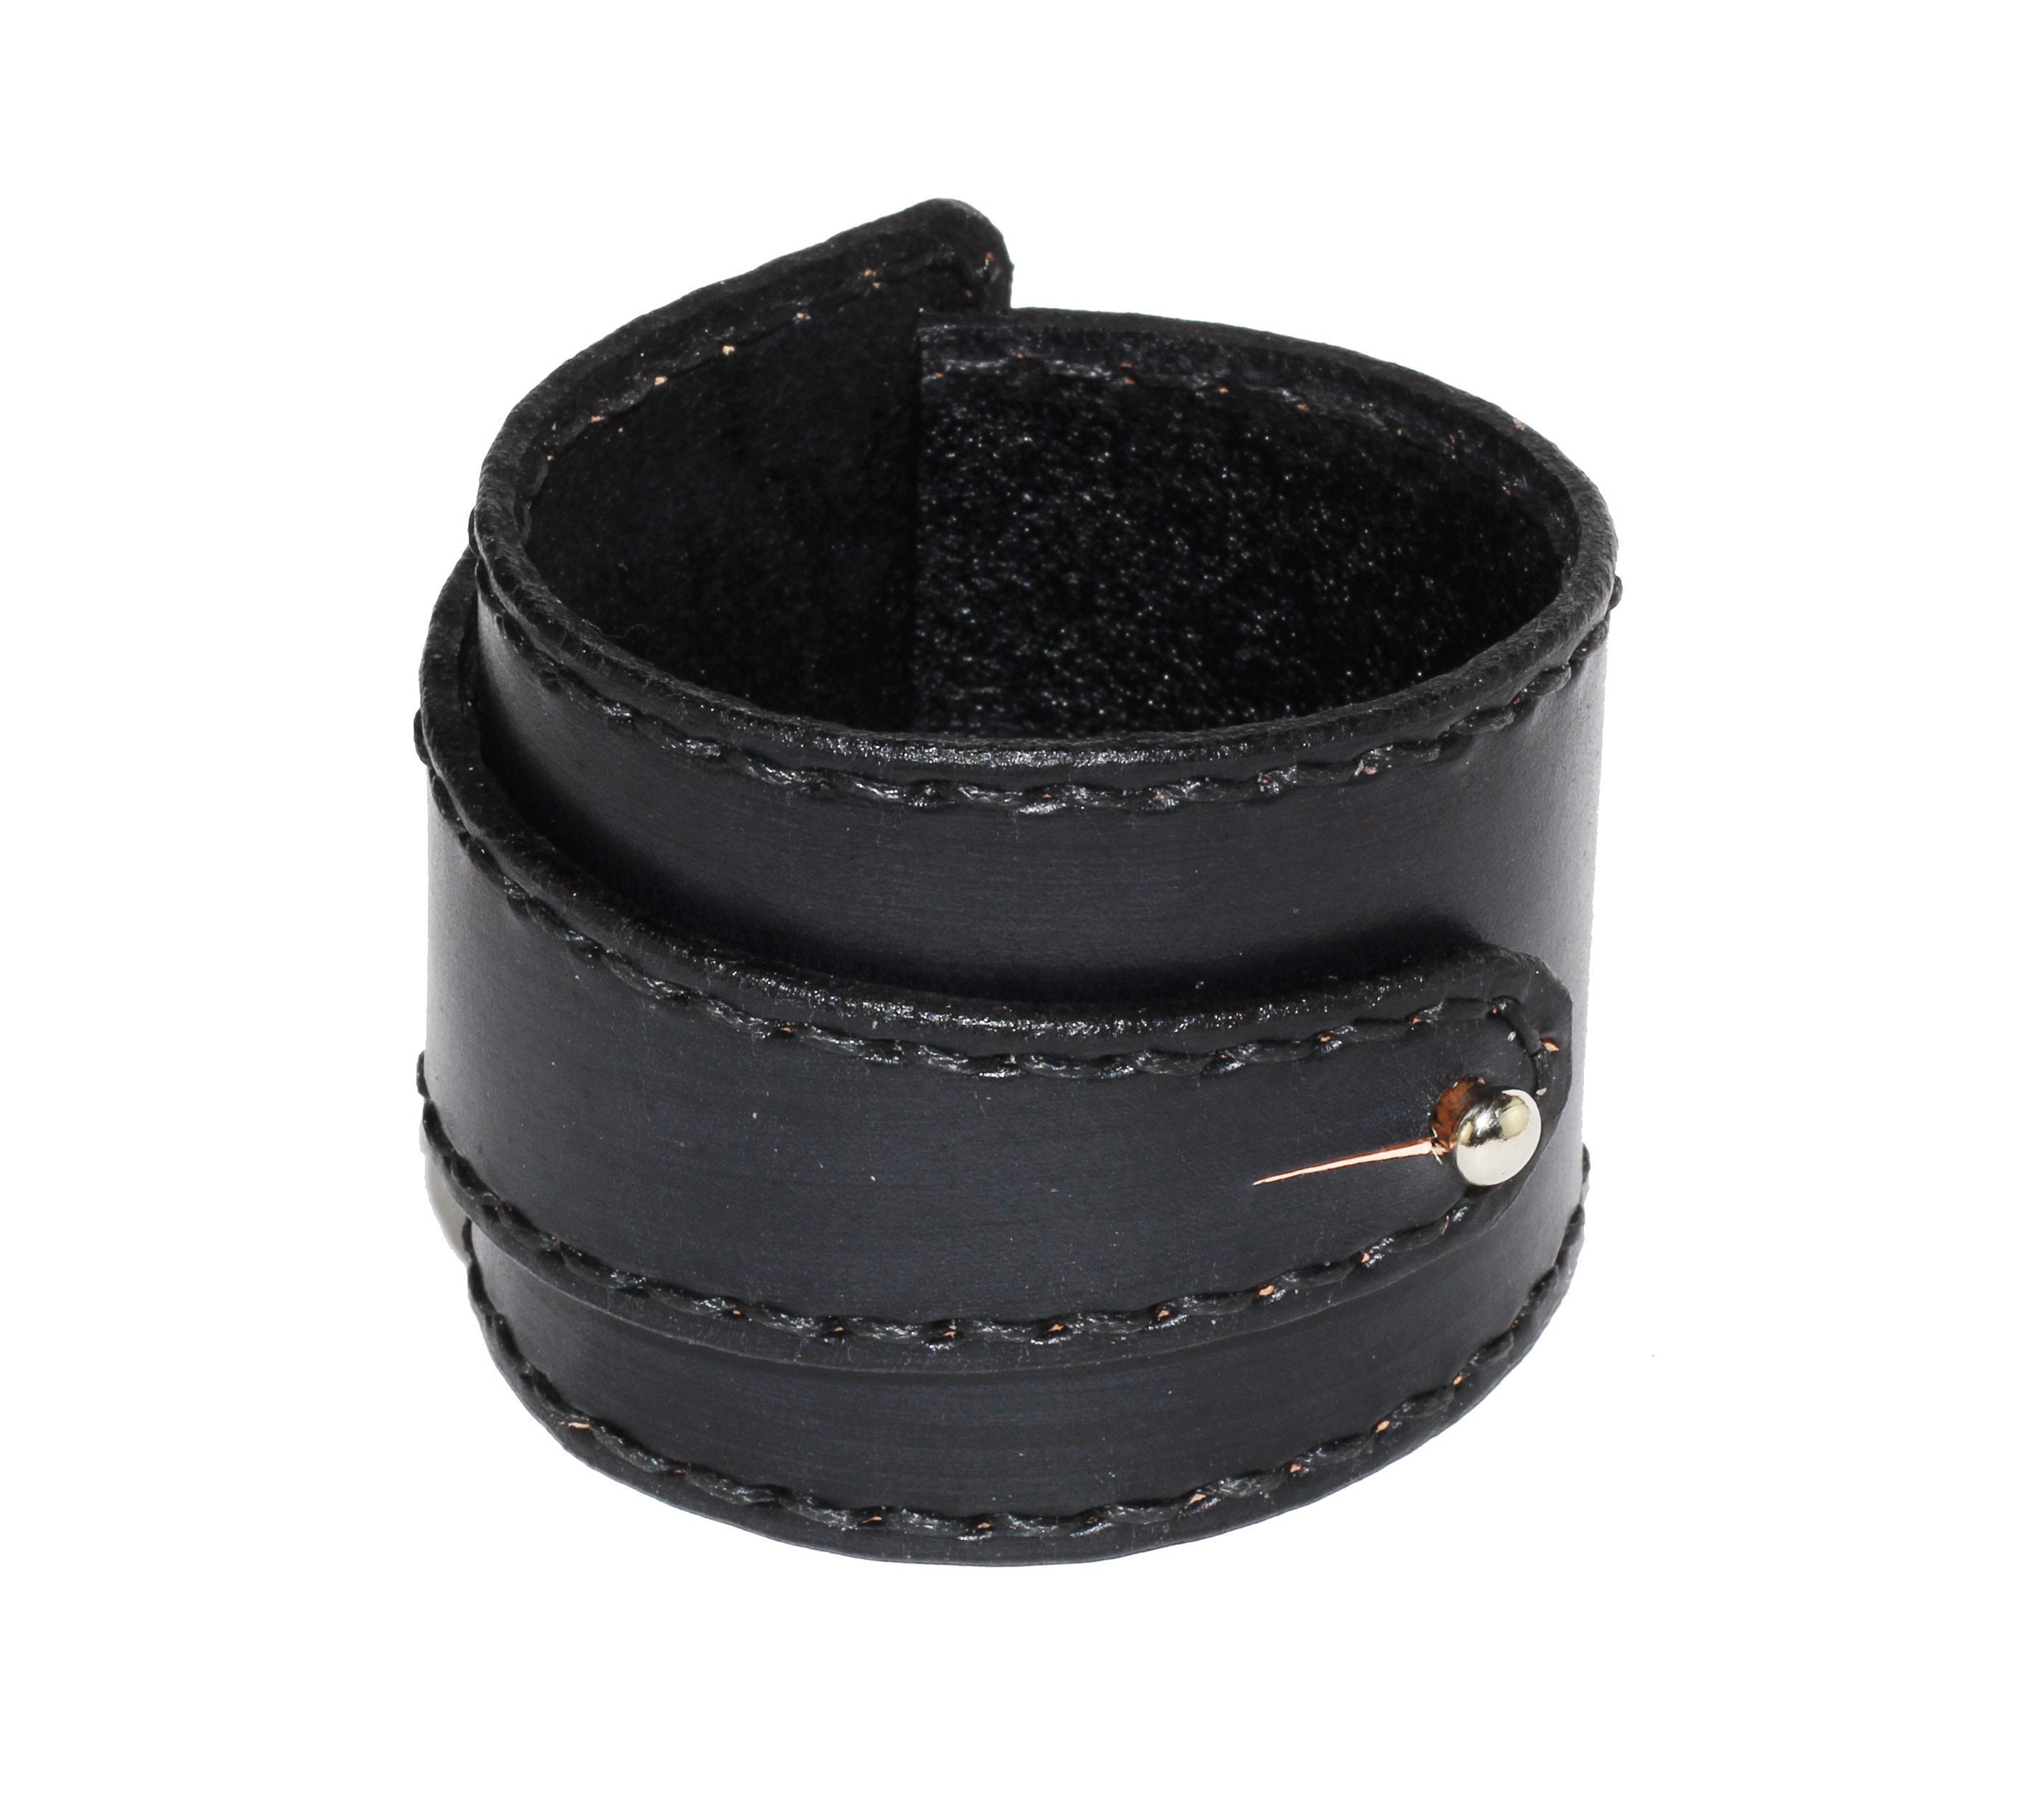 Black Mens Leather Cuff Bracelets at Best Price in Jaipur | Colors N Craft